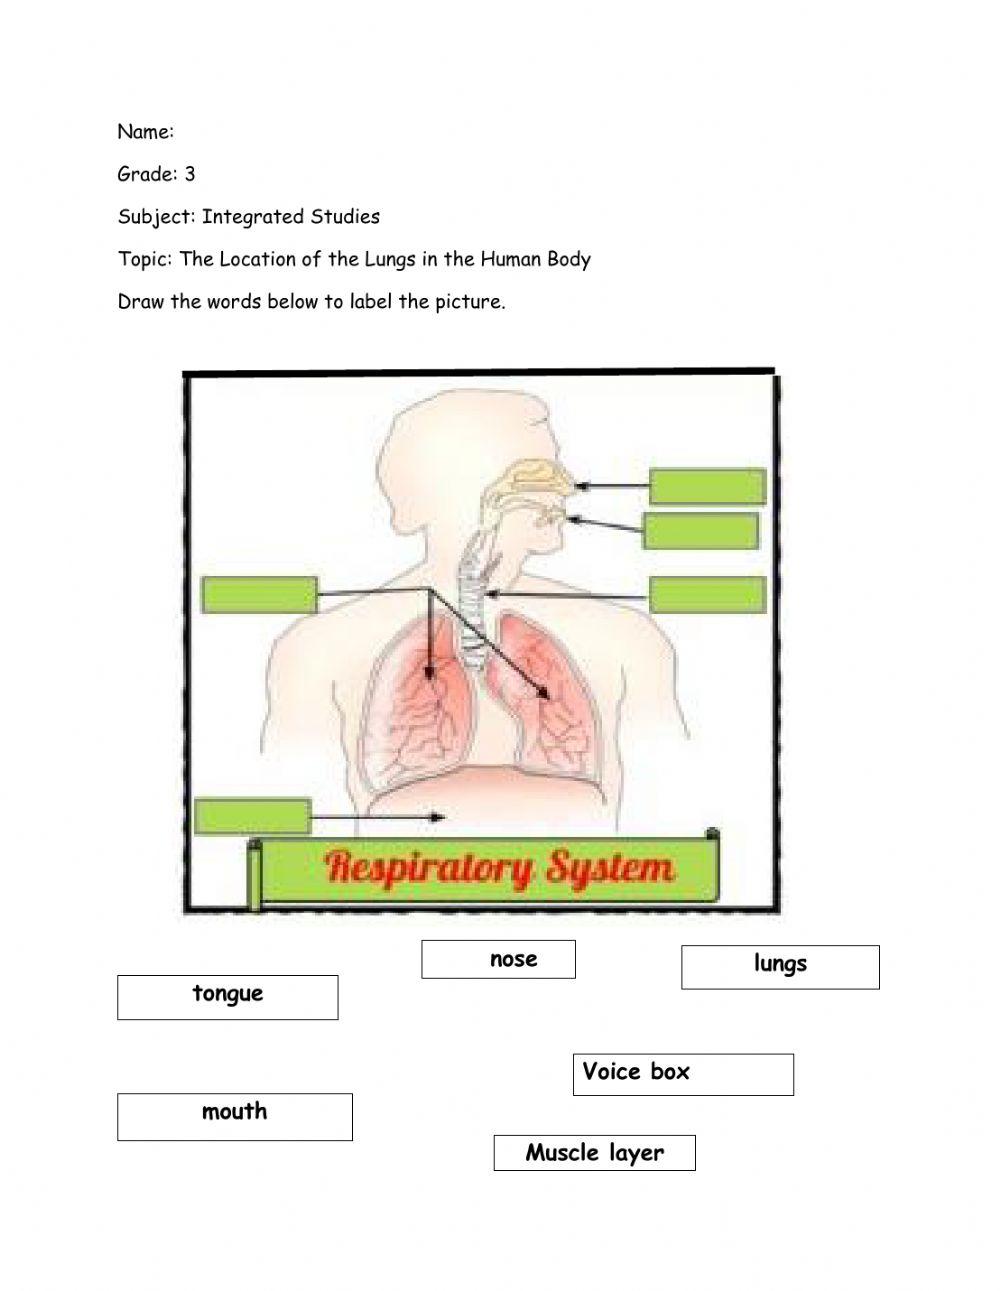 Label the Respiratory System